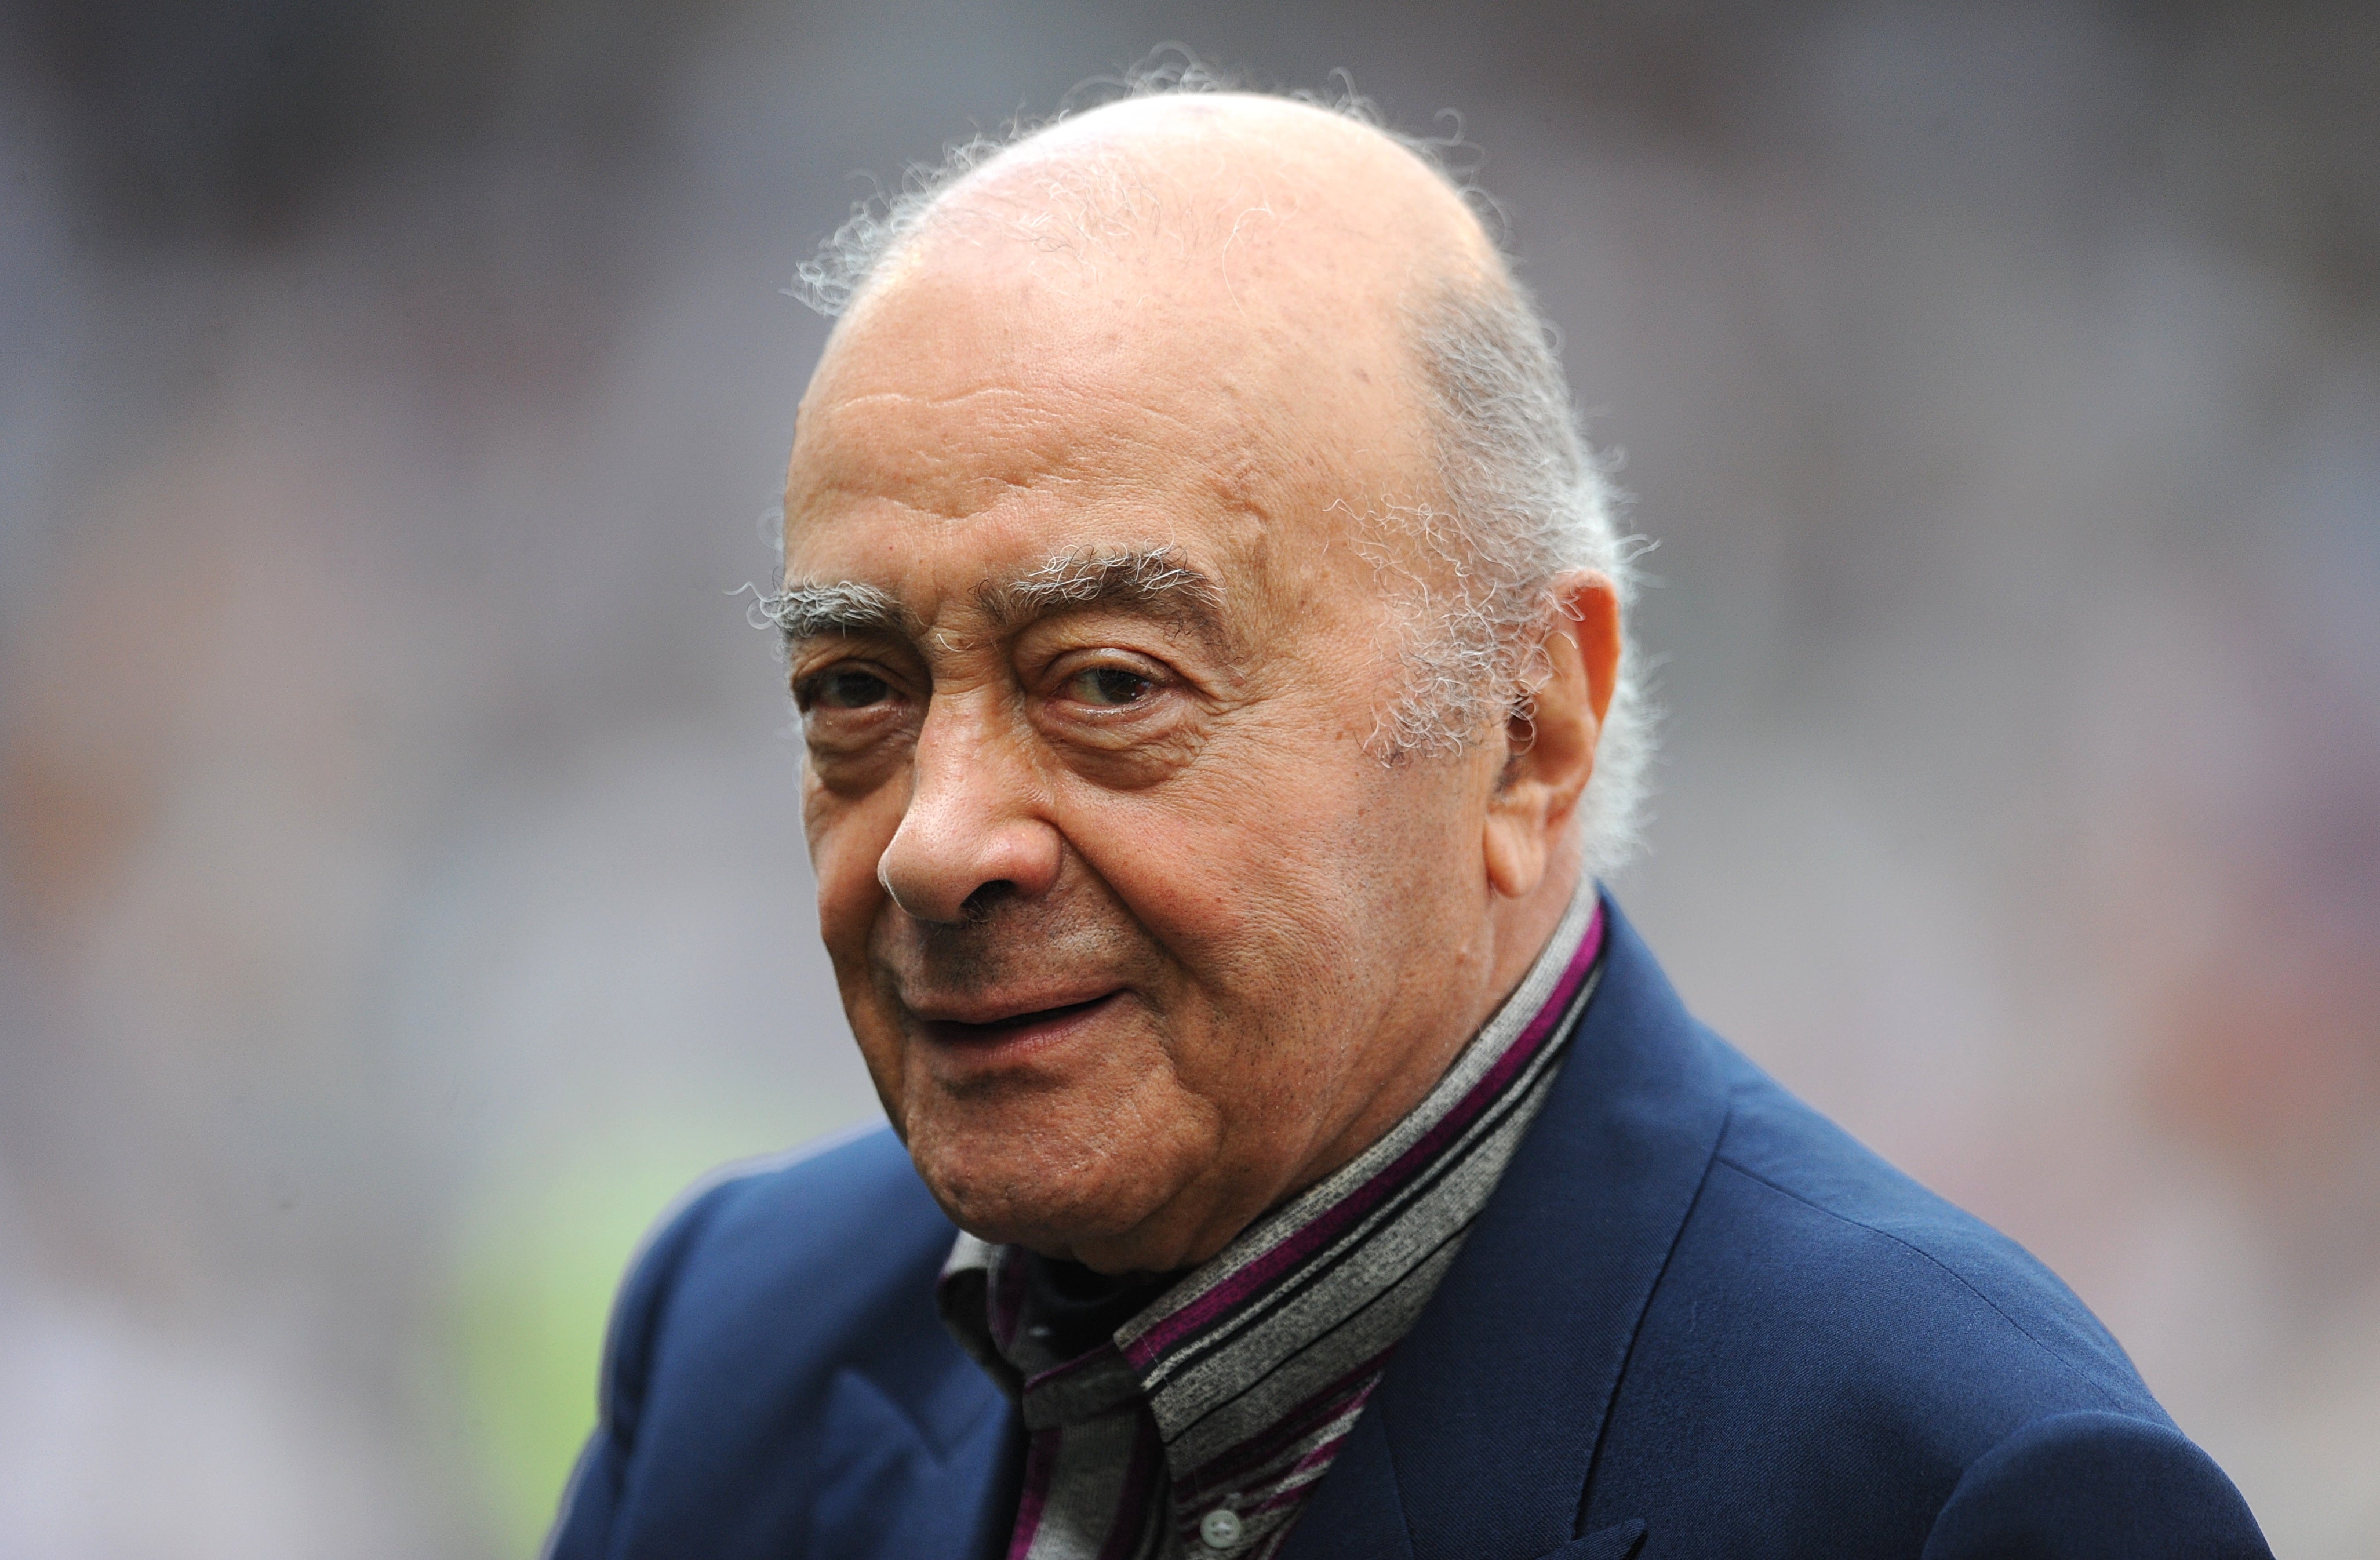 Mr Al Fayed famously fell out with the royal family over the death of his son Dodi alongside Princess Diana in 1997